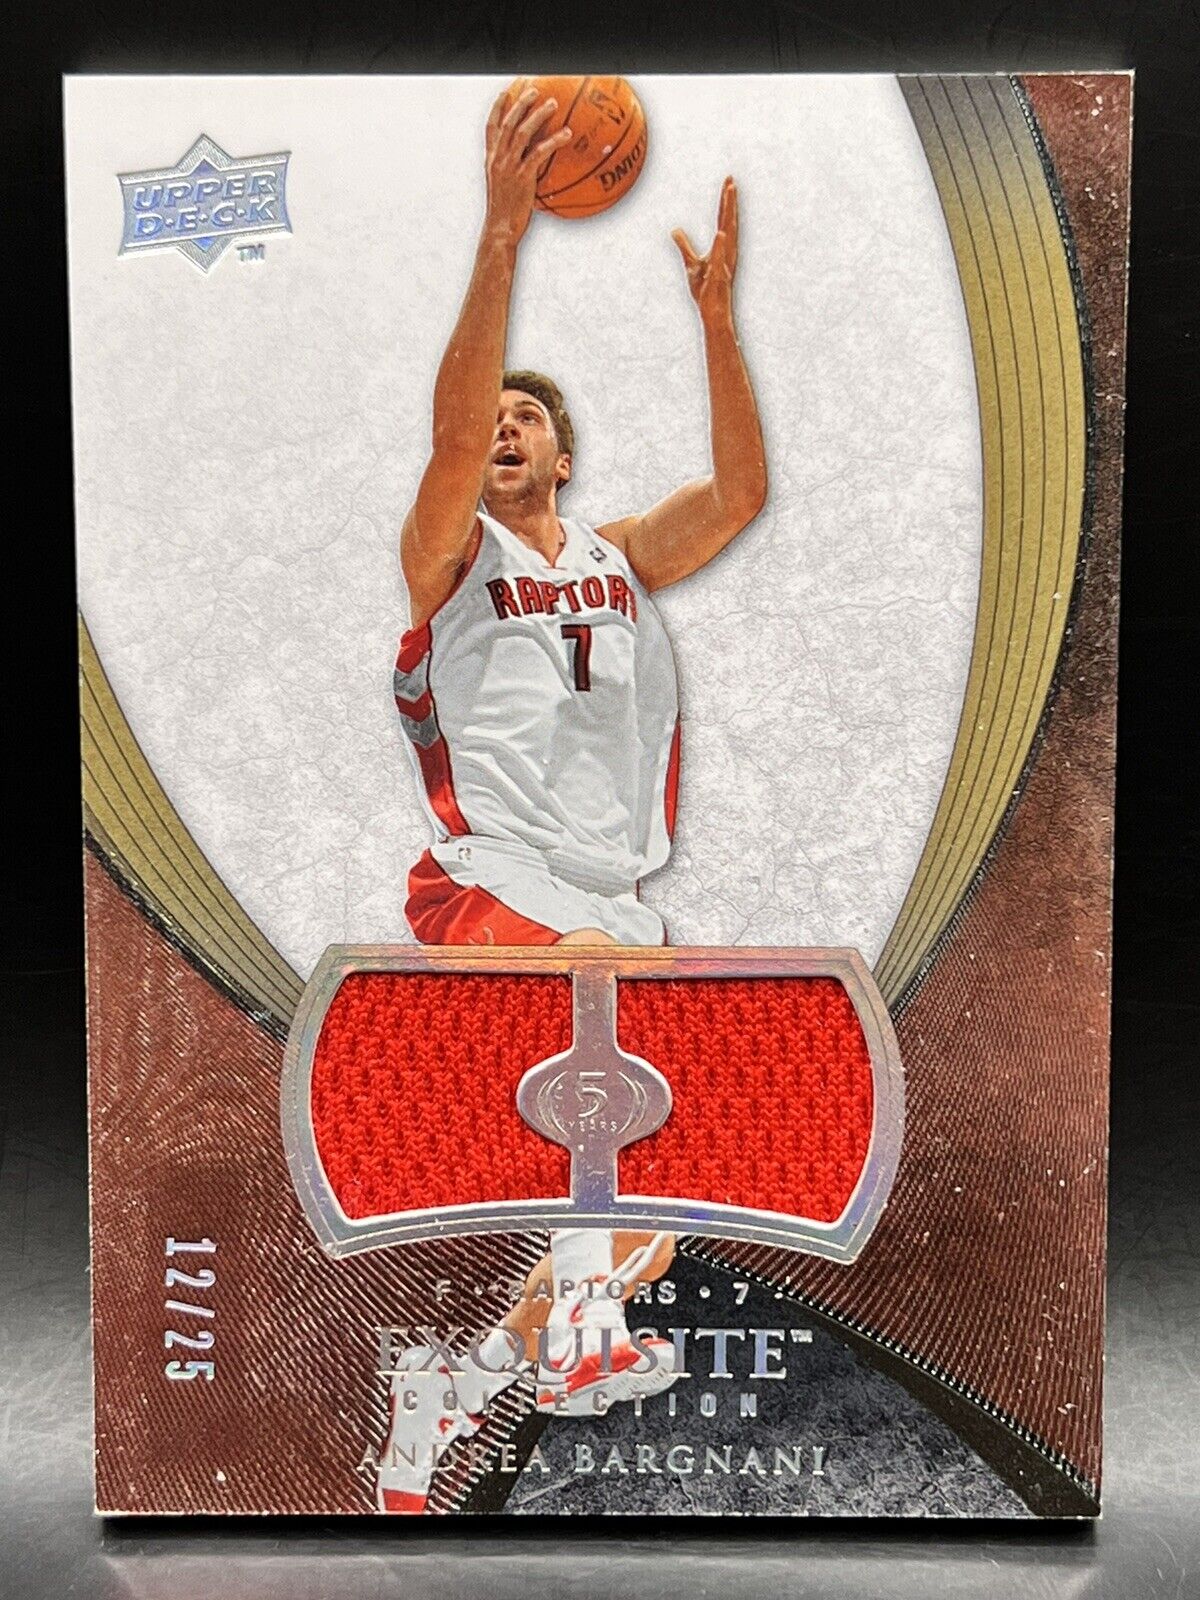 07-08 UD Exquisite Andrea Bargnani 12/25 NM+ NBA Game Used Raptors Jersey  Patch